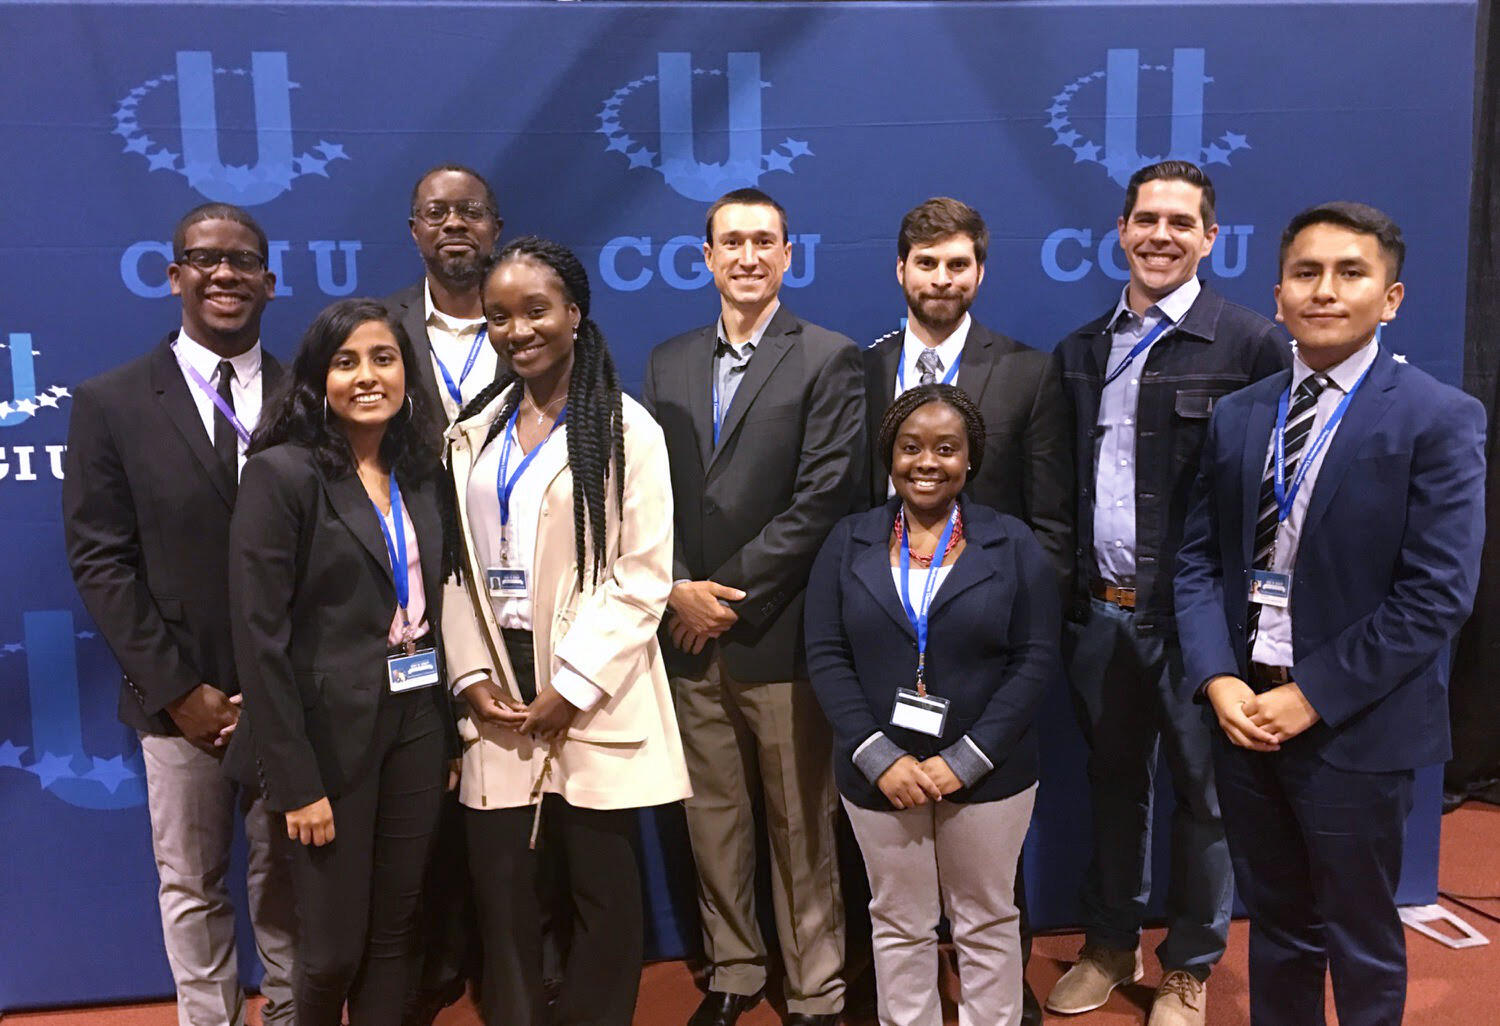 VCU sent its biggest contingent of students and alumni to the Clinton Global Initiative University, which brings together innovative students from around the world to work on some of the most important global challenges.